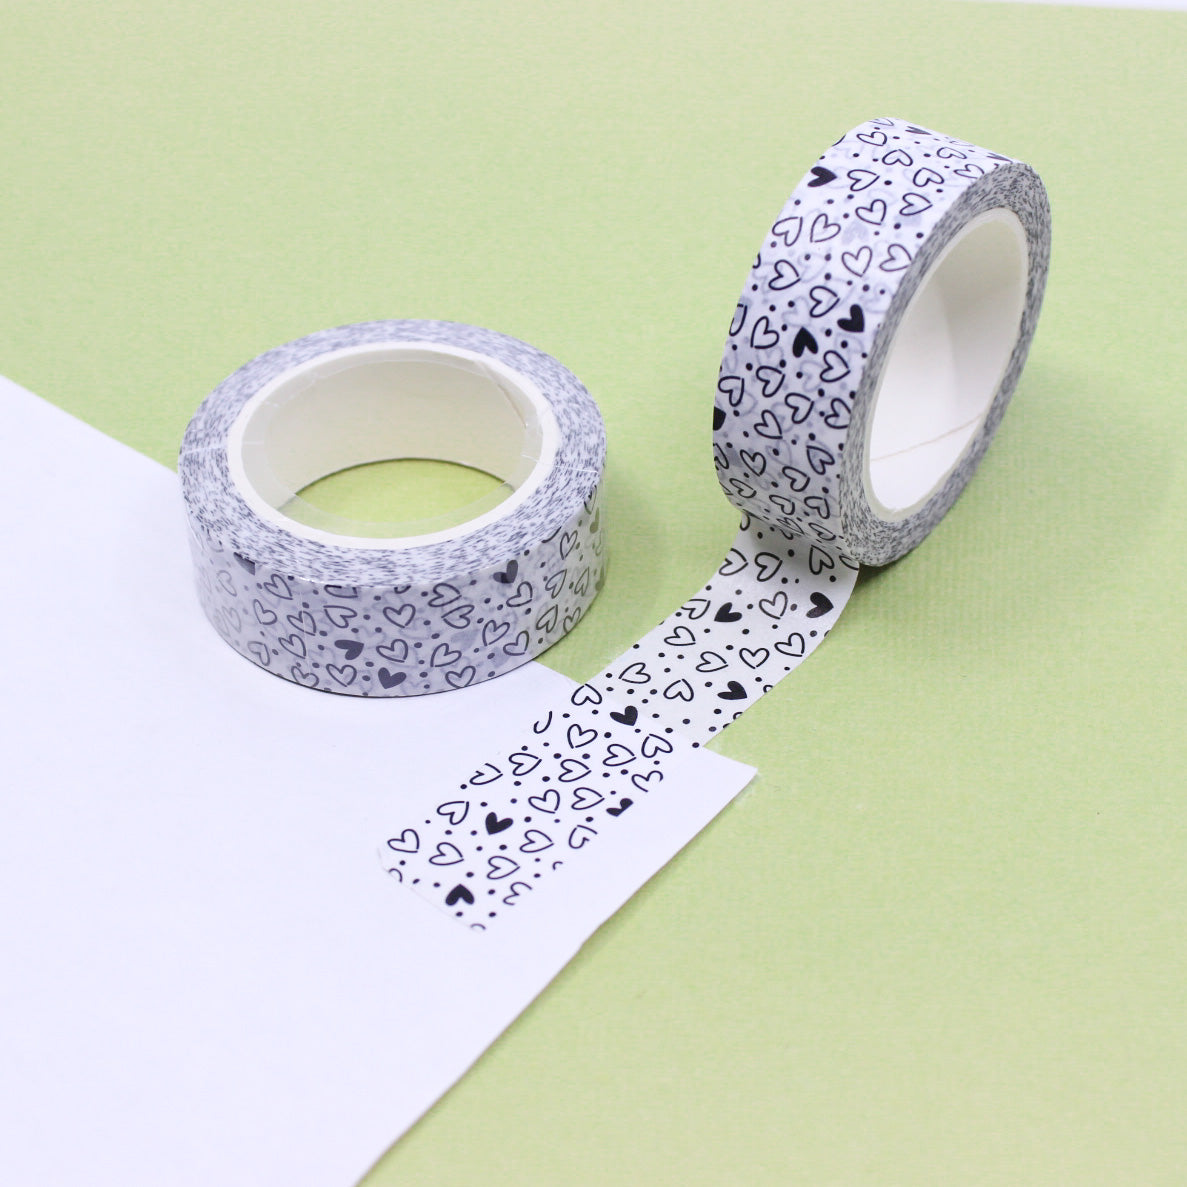 Add a playful touch to your crafts with this fun and modern black and white hearts washi tape. Featuring a stylish heart pattern, this tape is perfect for adding a pop of pattern to your projects. Use it to decorate scrapbook pages, greeting cards, and more! This tape is sold at BBB Supplies Craft Shop.